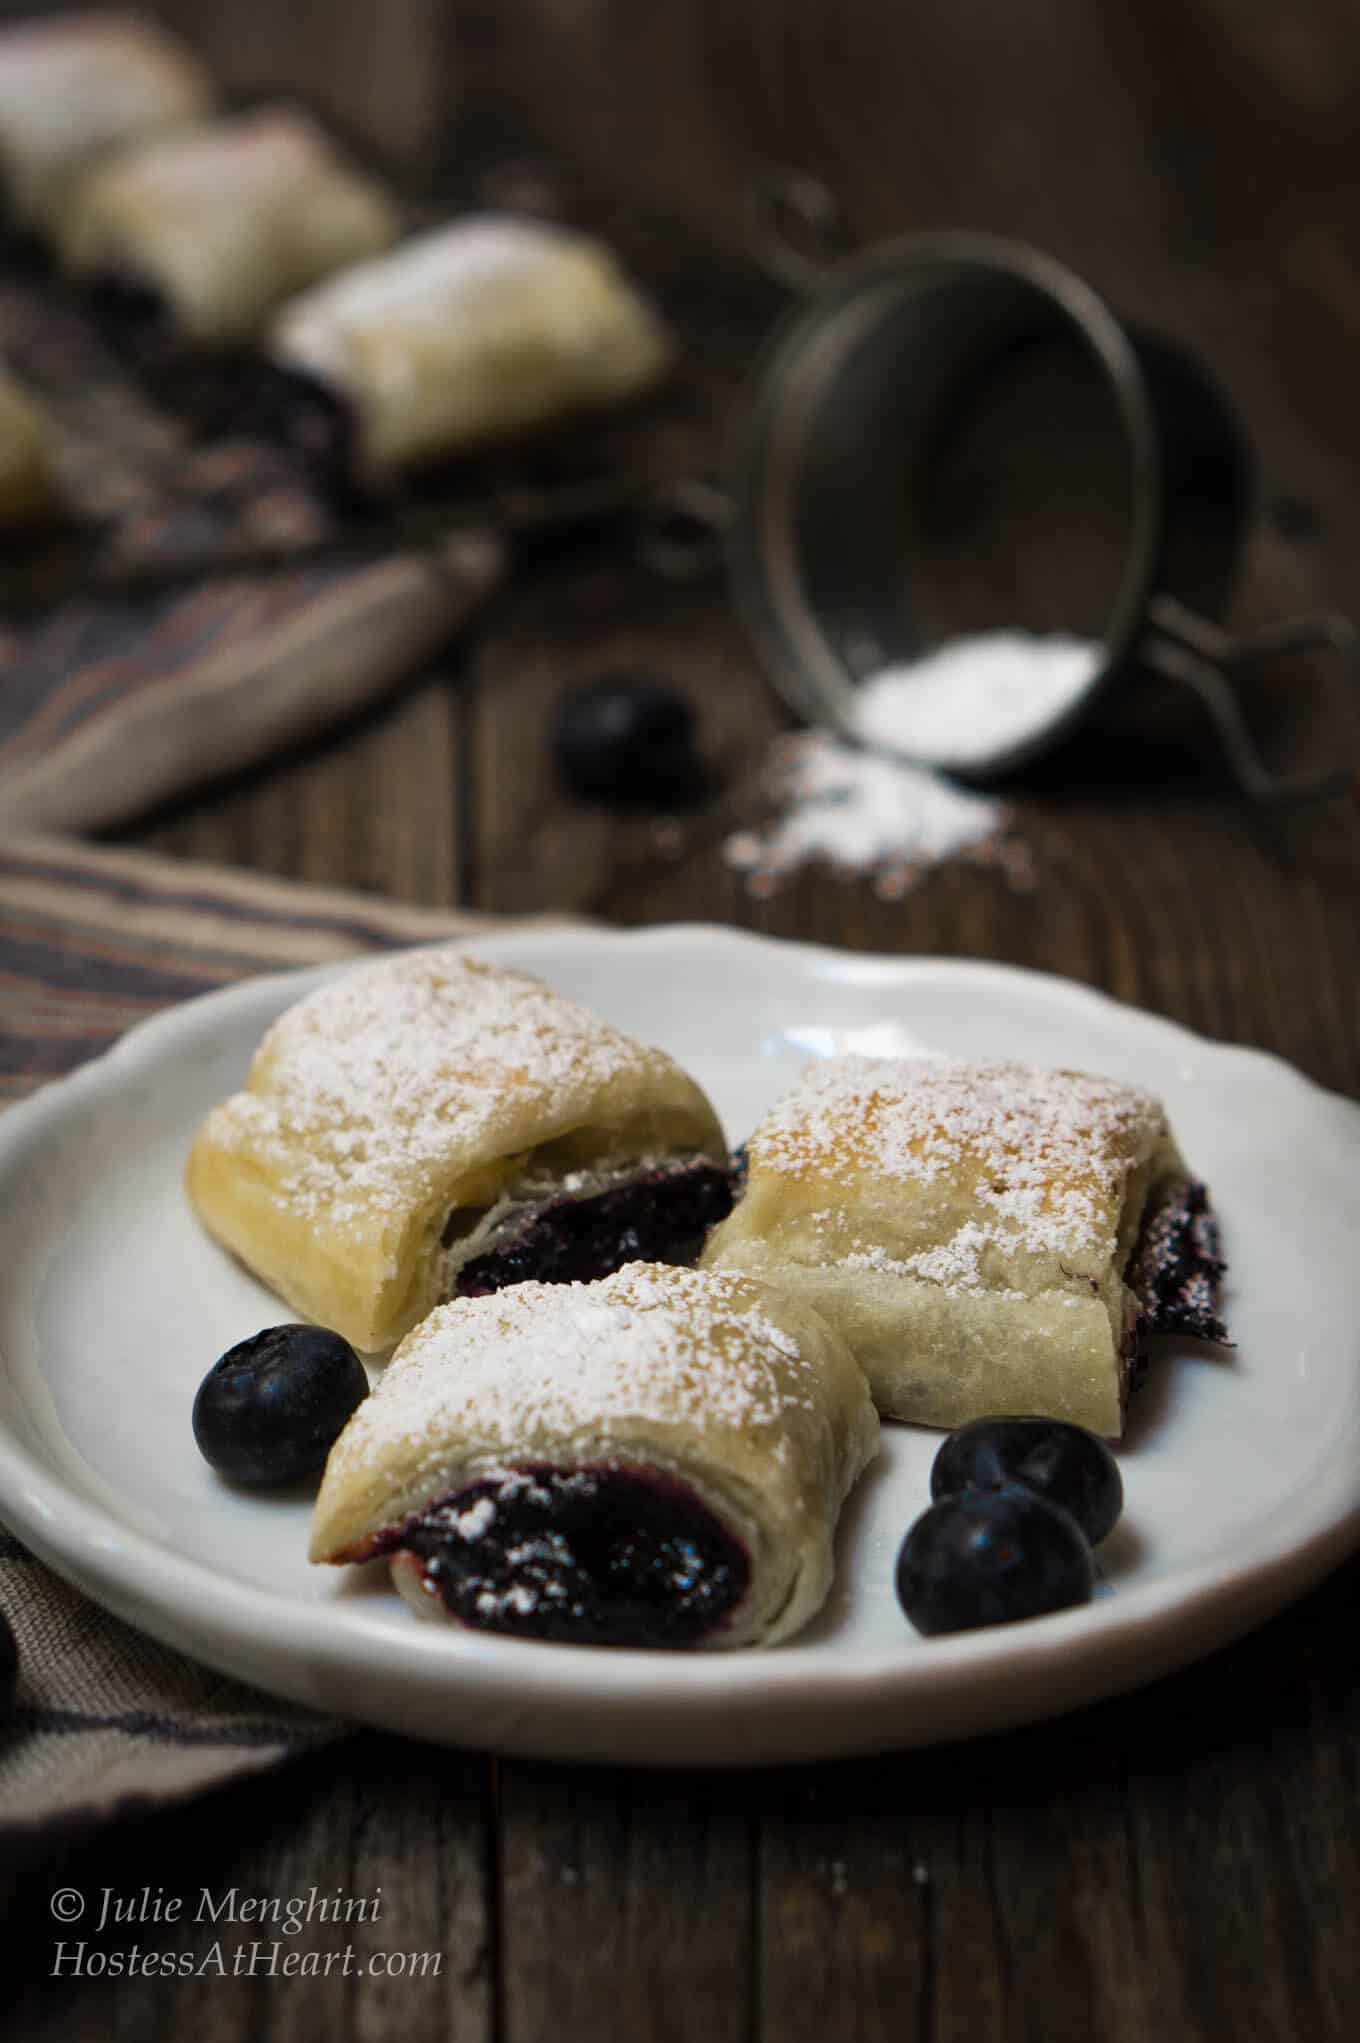 Blueberry Puff Pastry Rolls are quick, easy and delicious. They are perfect for your breakfast, brunch or that sweet treat after any meal | HostessAtHeart.com